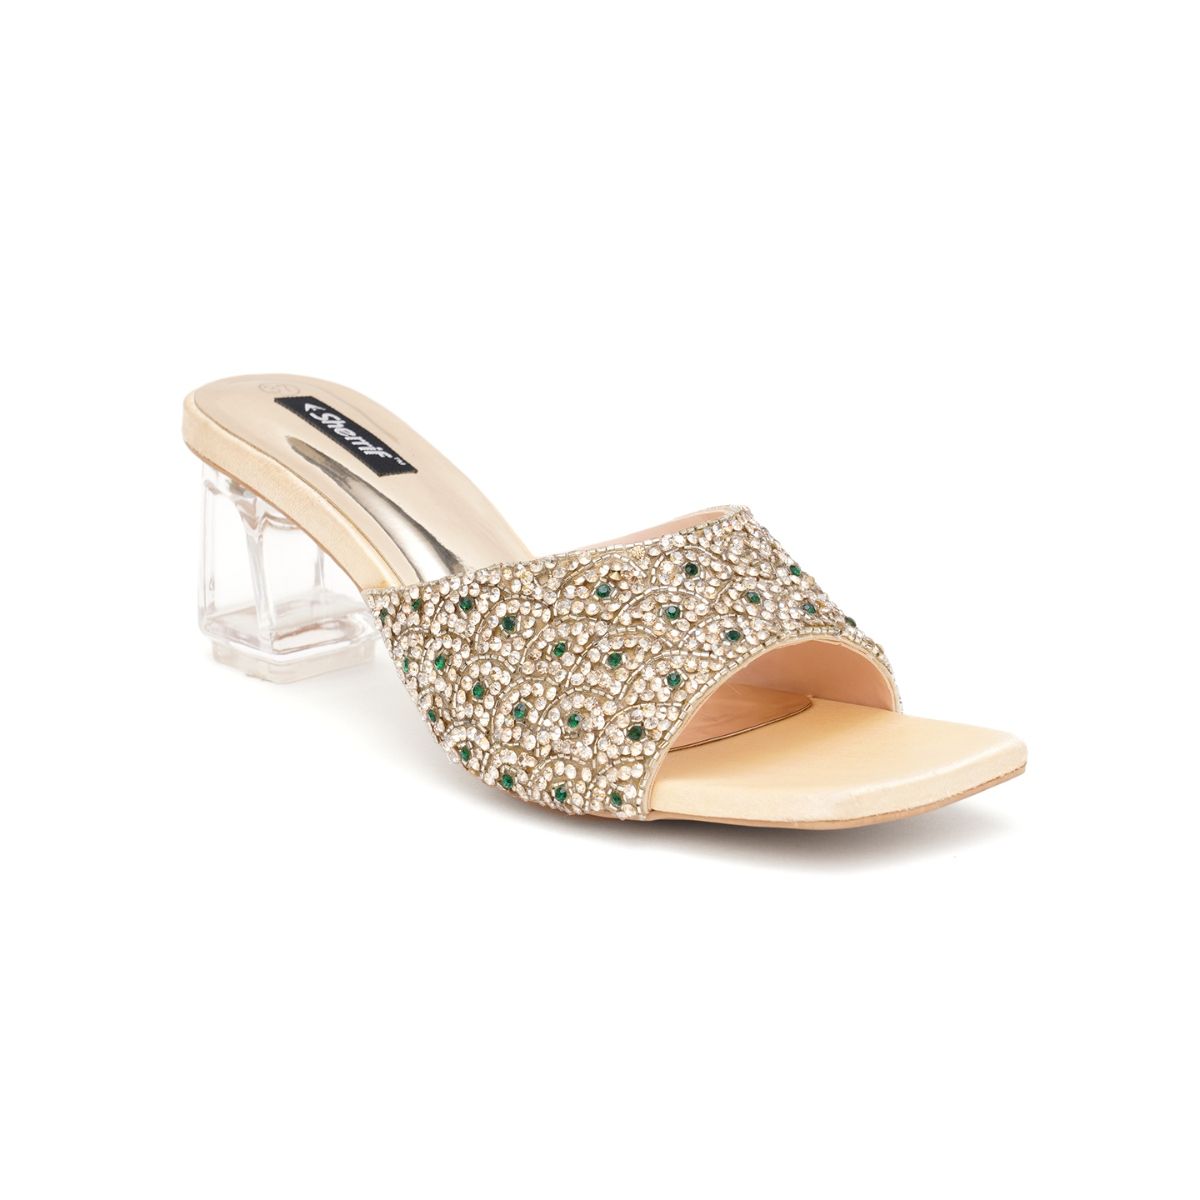 Shop the Latest Girls' Sandals Collection | Heels Shoes